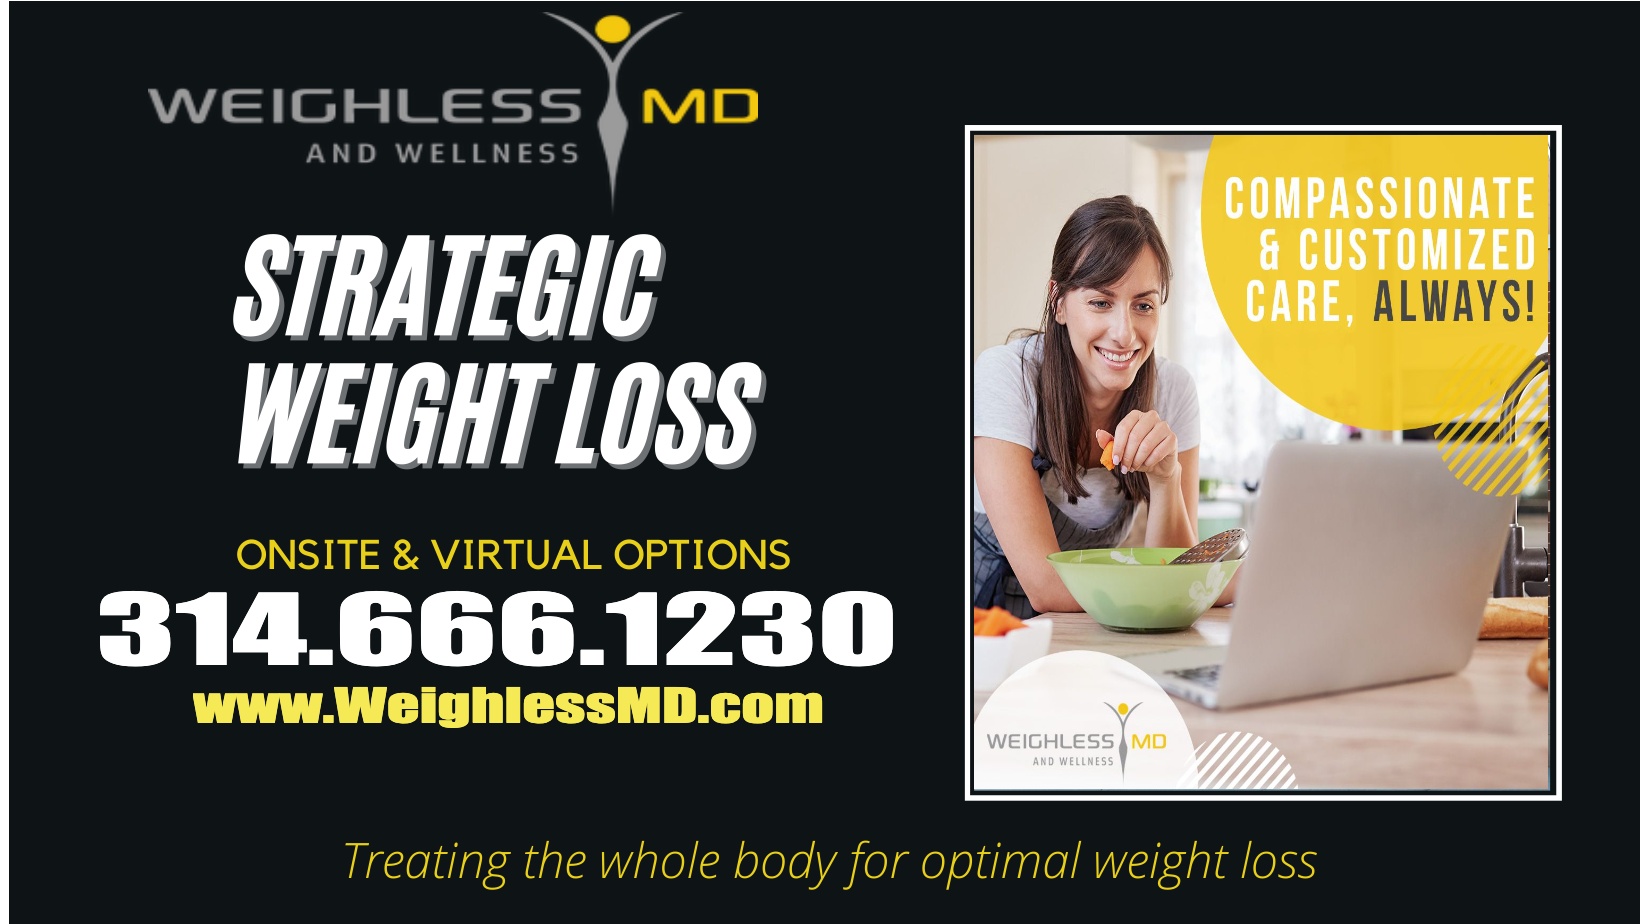 Strategic weight Loss for Weighless MD in St. Louis MO